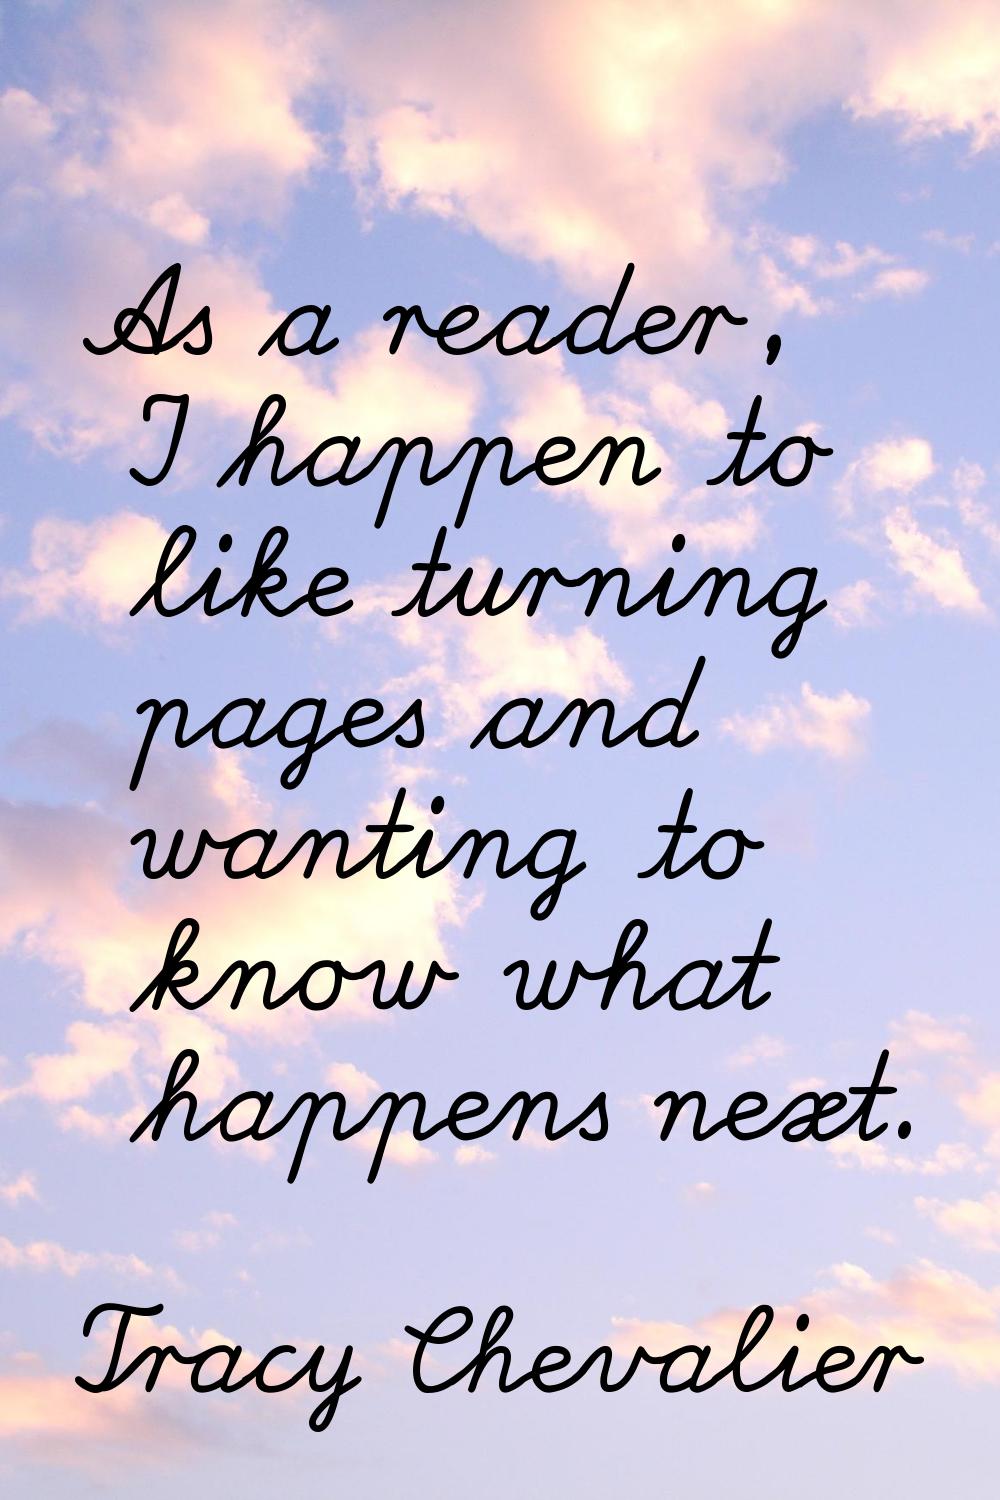 As a reader, I happen to like turning pages and wanting to know what happens next.